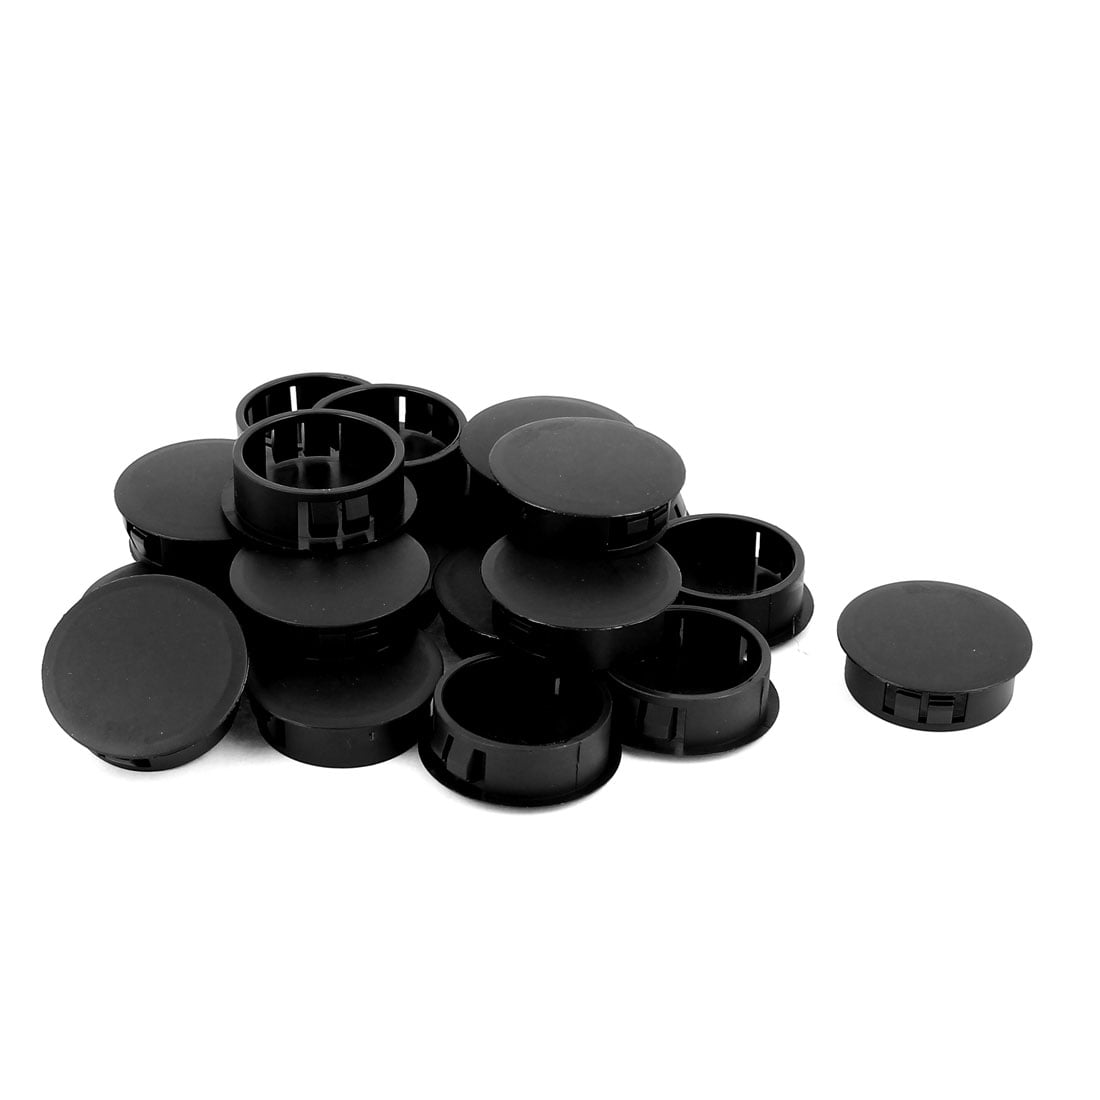 20pcs Plastic 30mm Dia Snap in Type Locking Hole Plugs Button Cover 